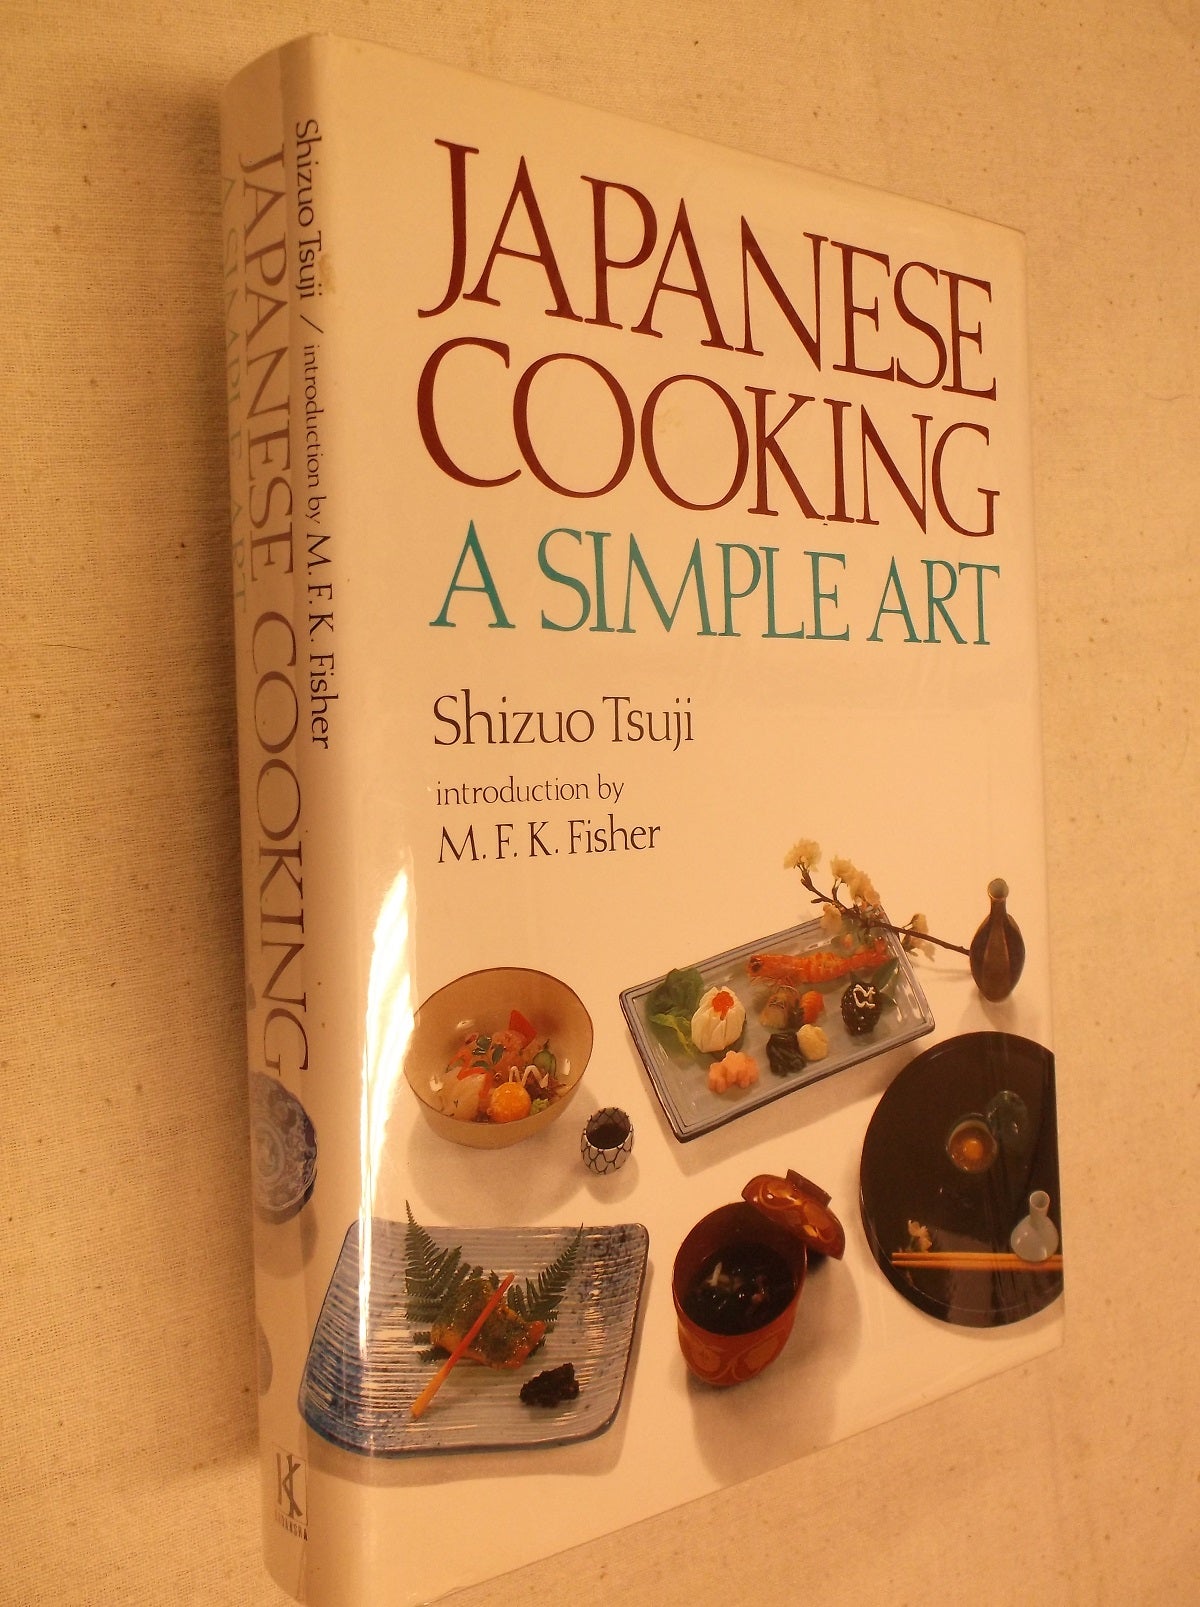 Tsuji,　Cooking:　Simple　K.　Fisher,　Japanese　A　M.　F.　Art　Shizuo　Introduction